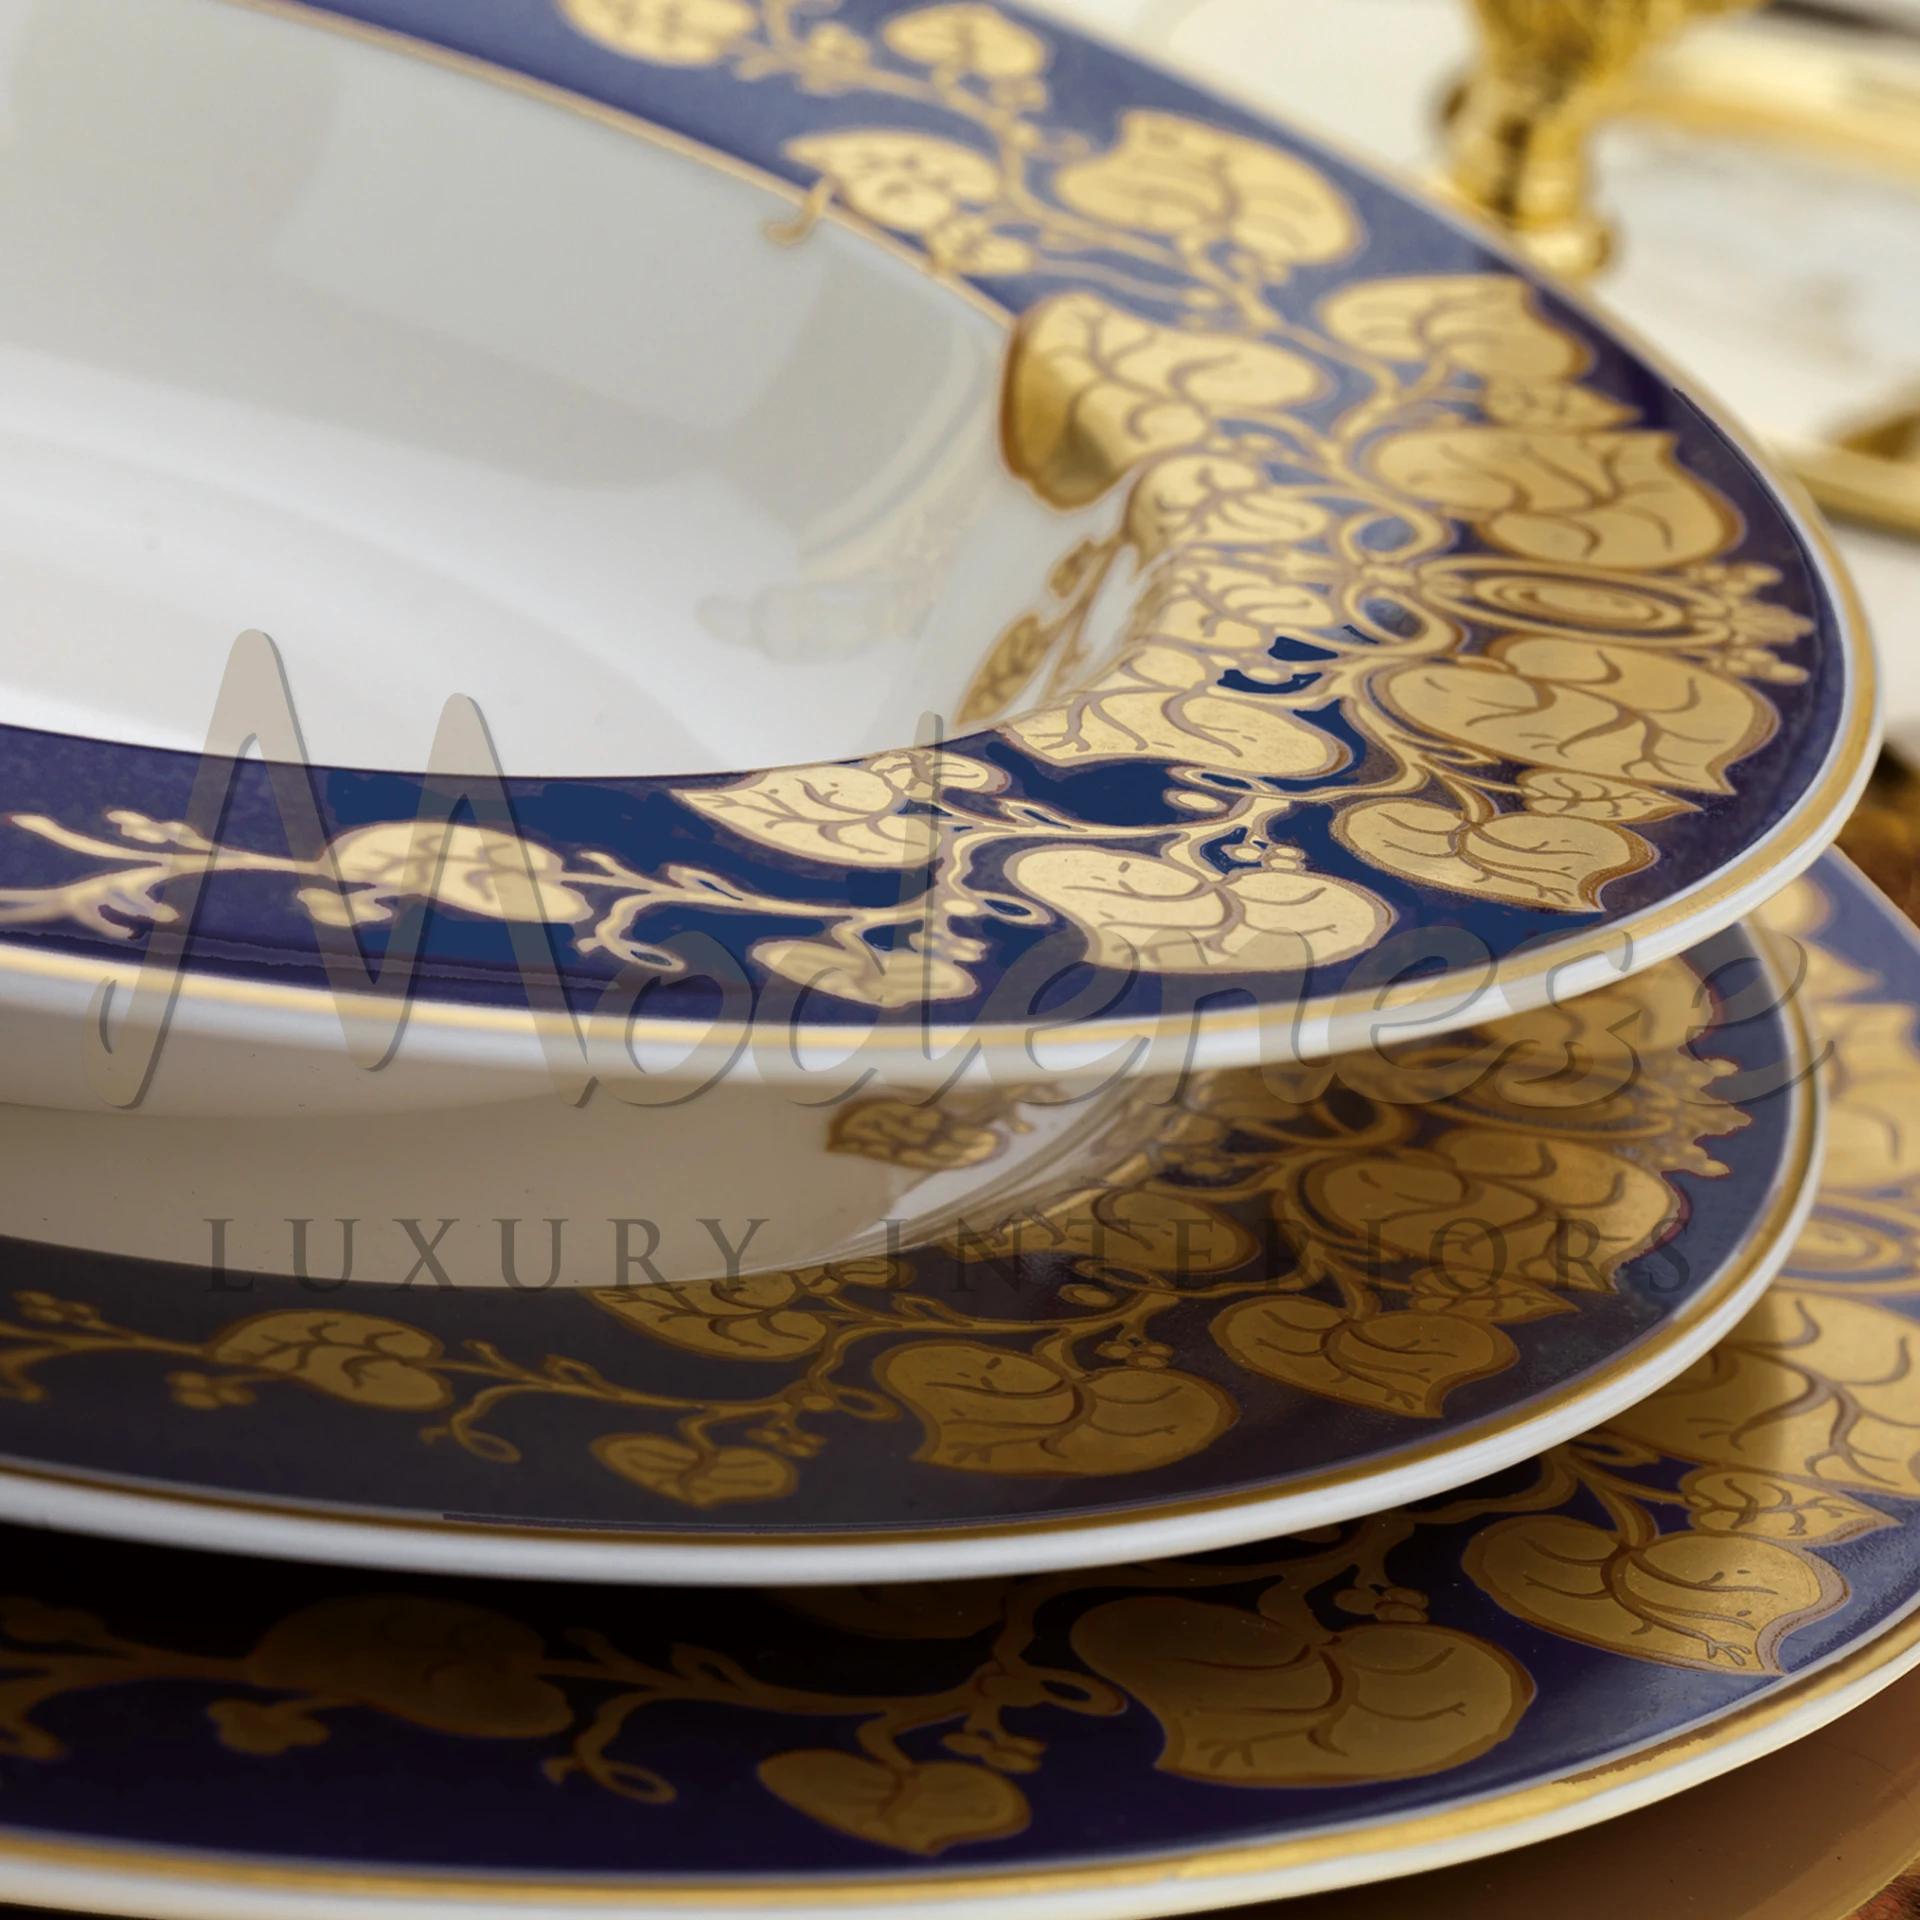 three elegant porcelain plates with a blue border and gold floral design.